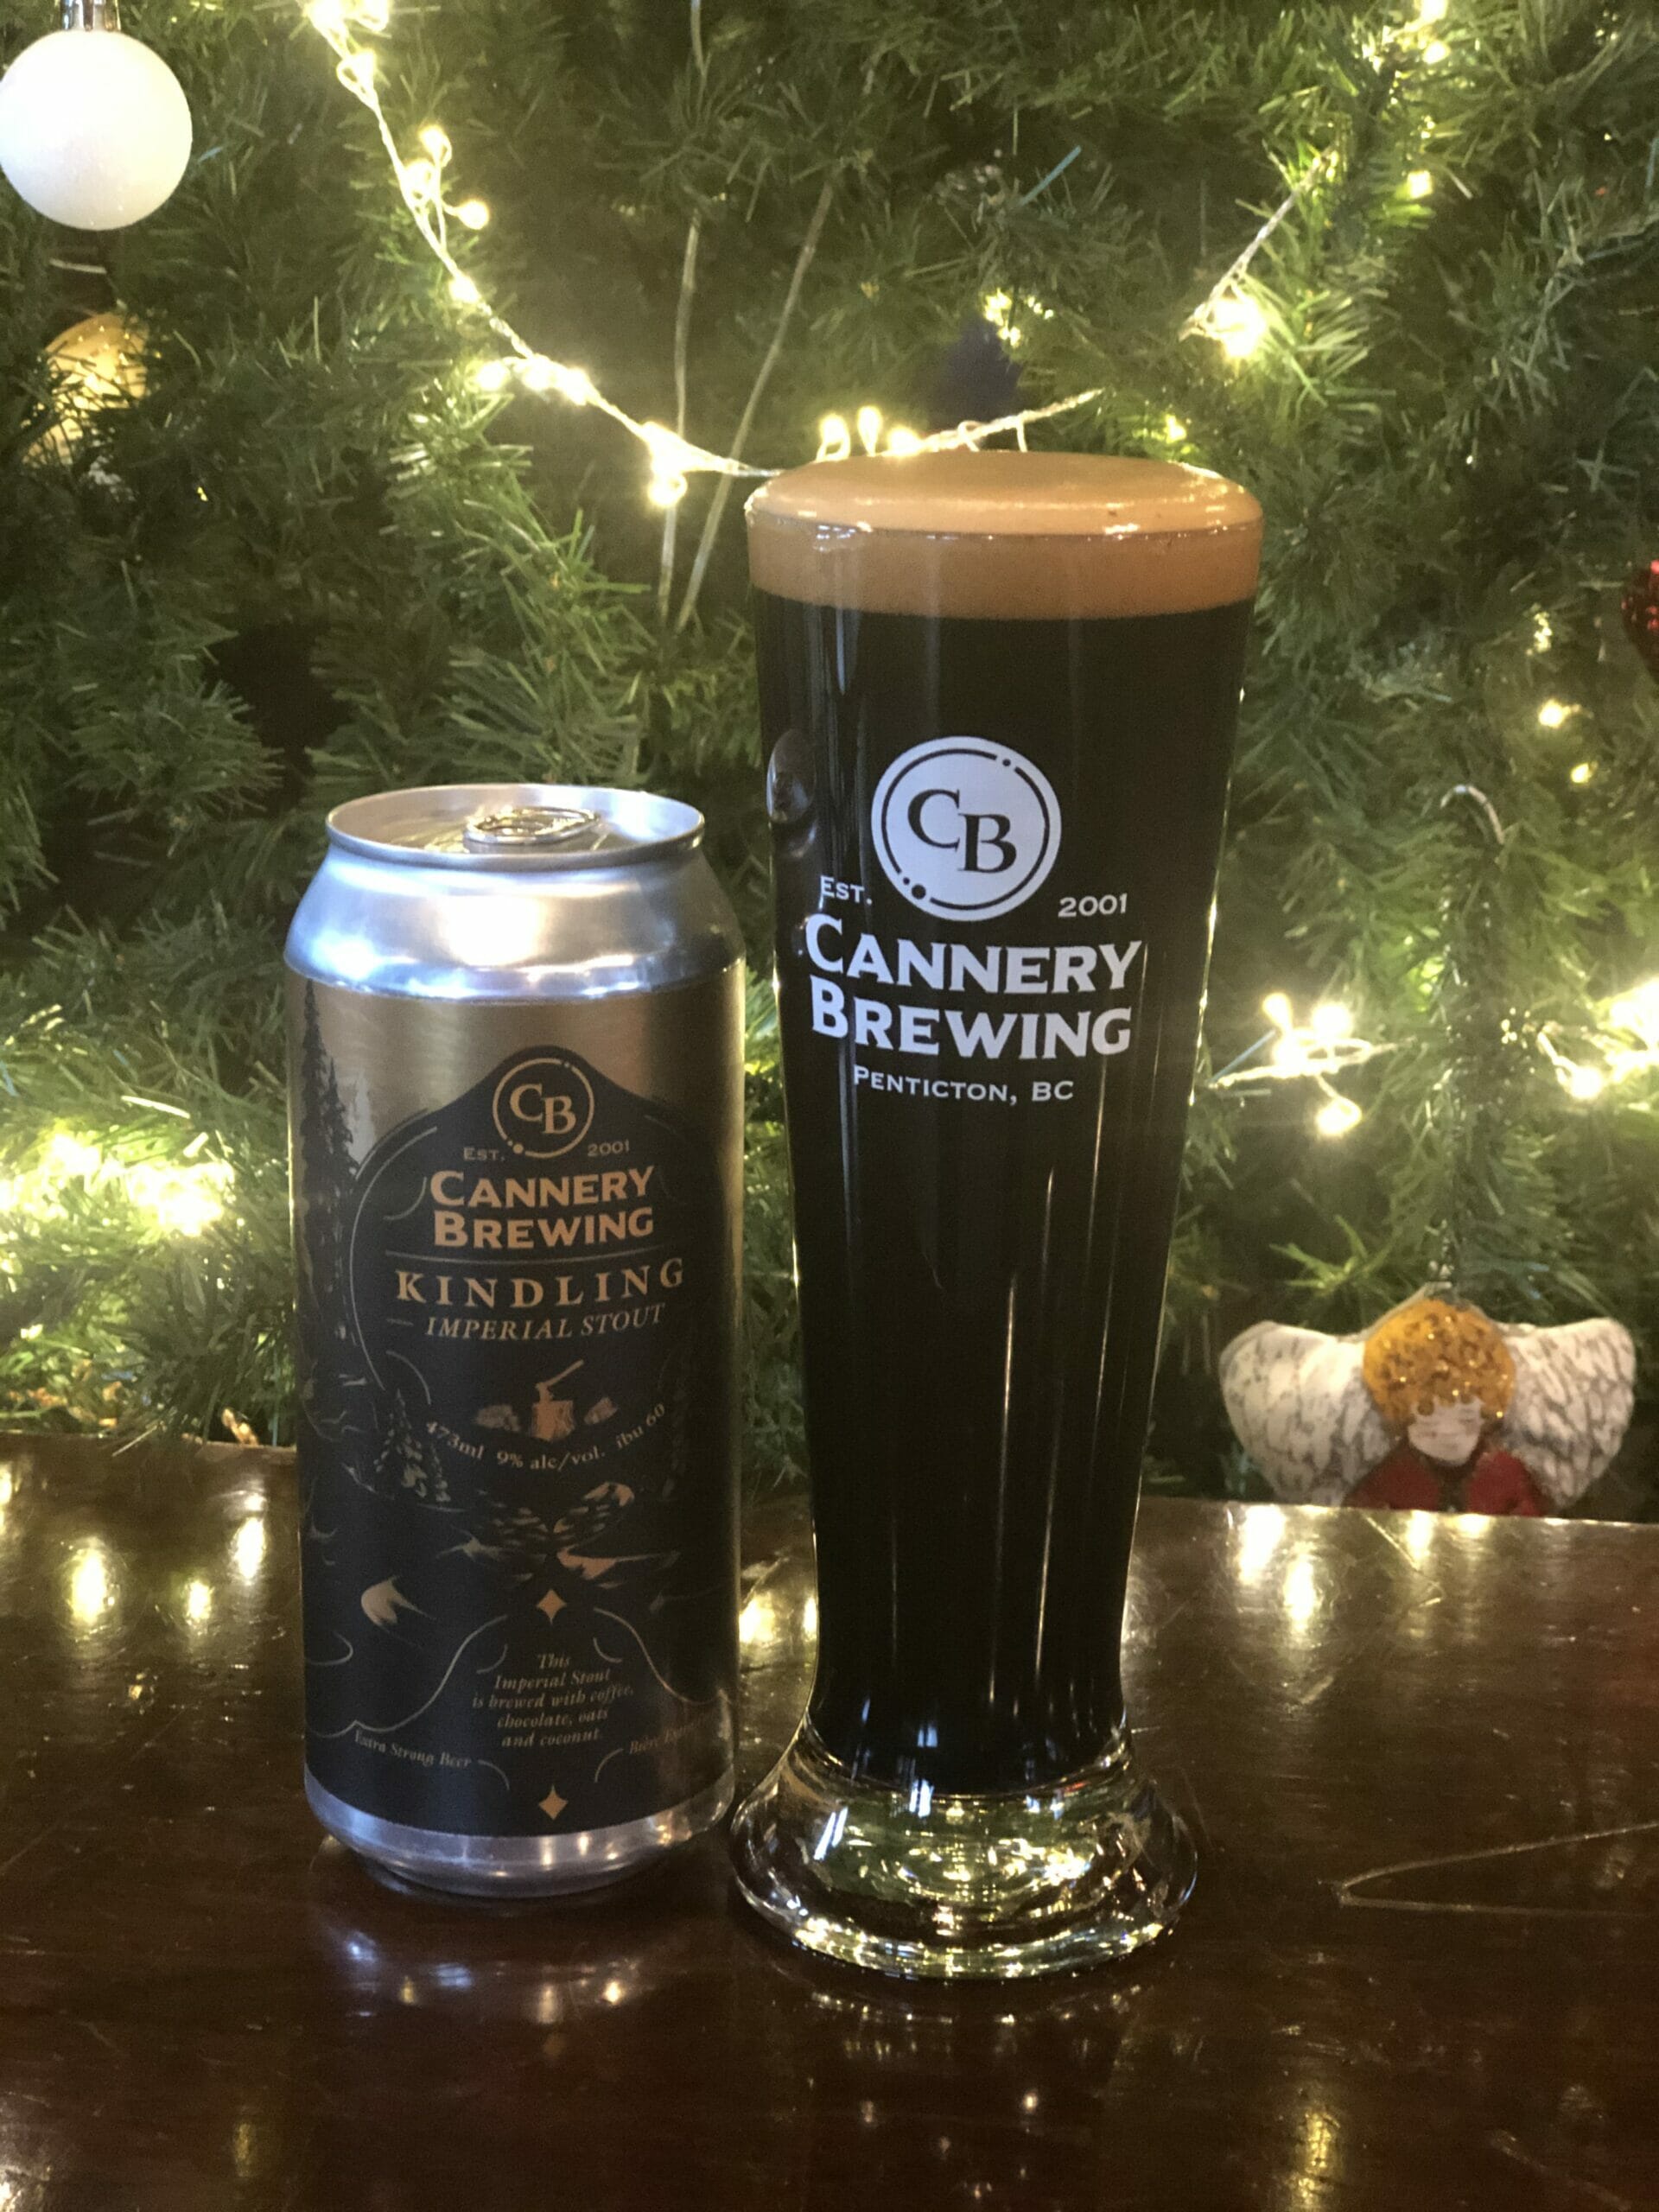 Cannery Brewing Kindling Imperial Stout